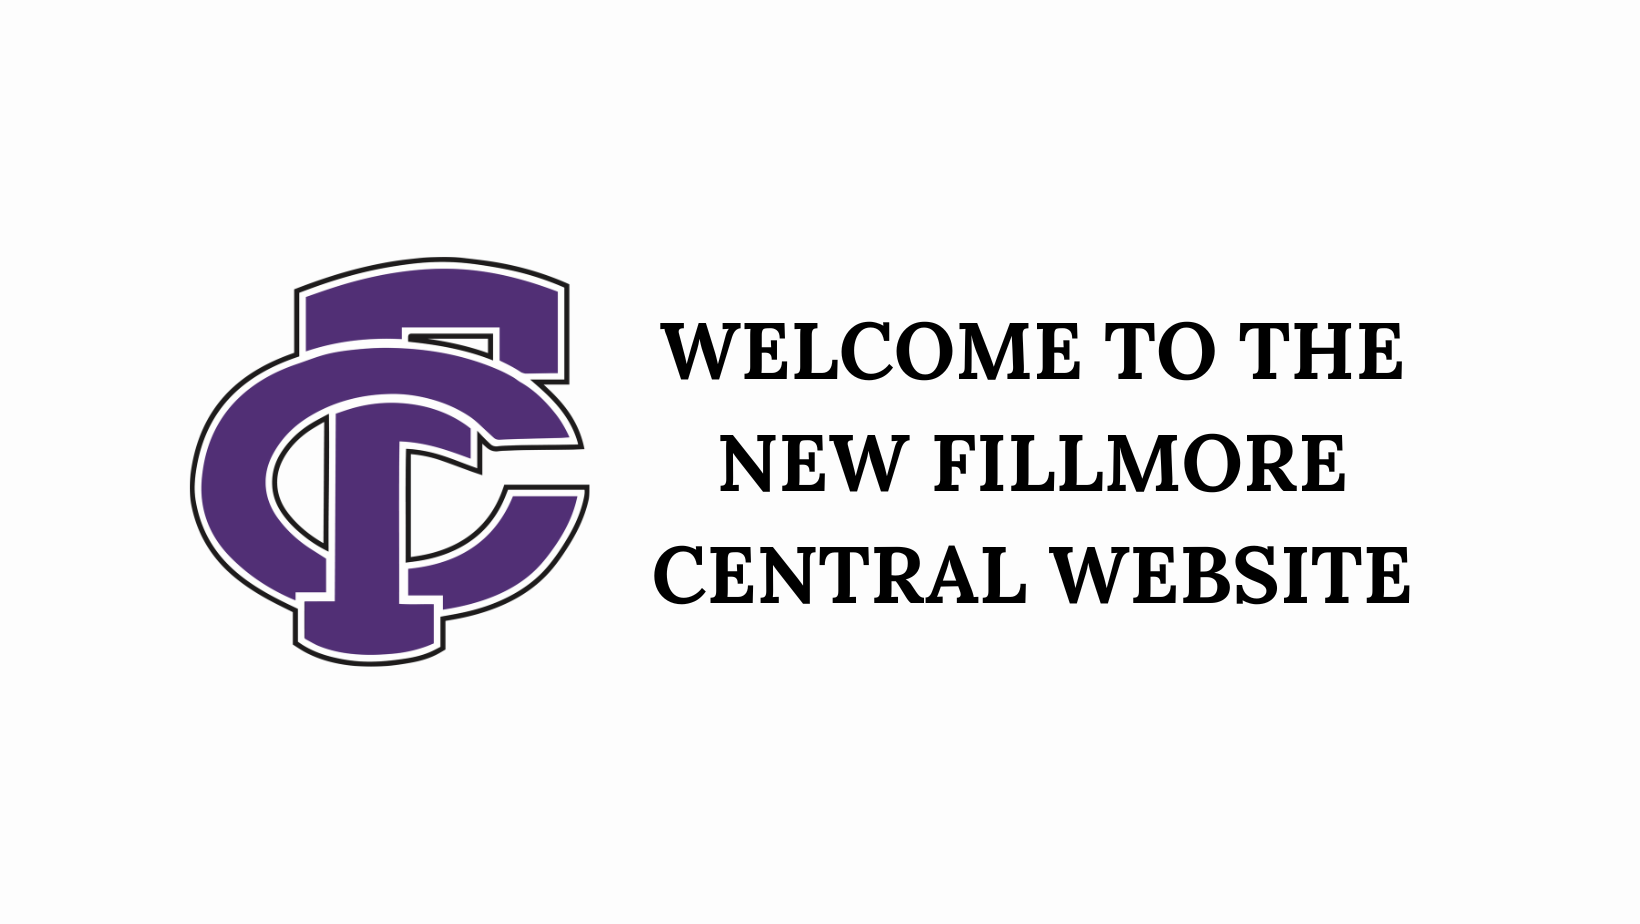 Welcome to the new Fillmore Central Website